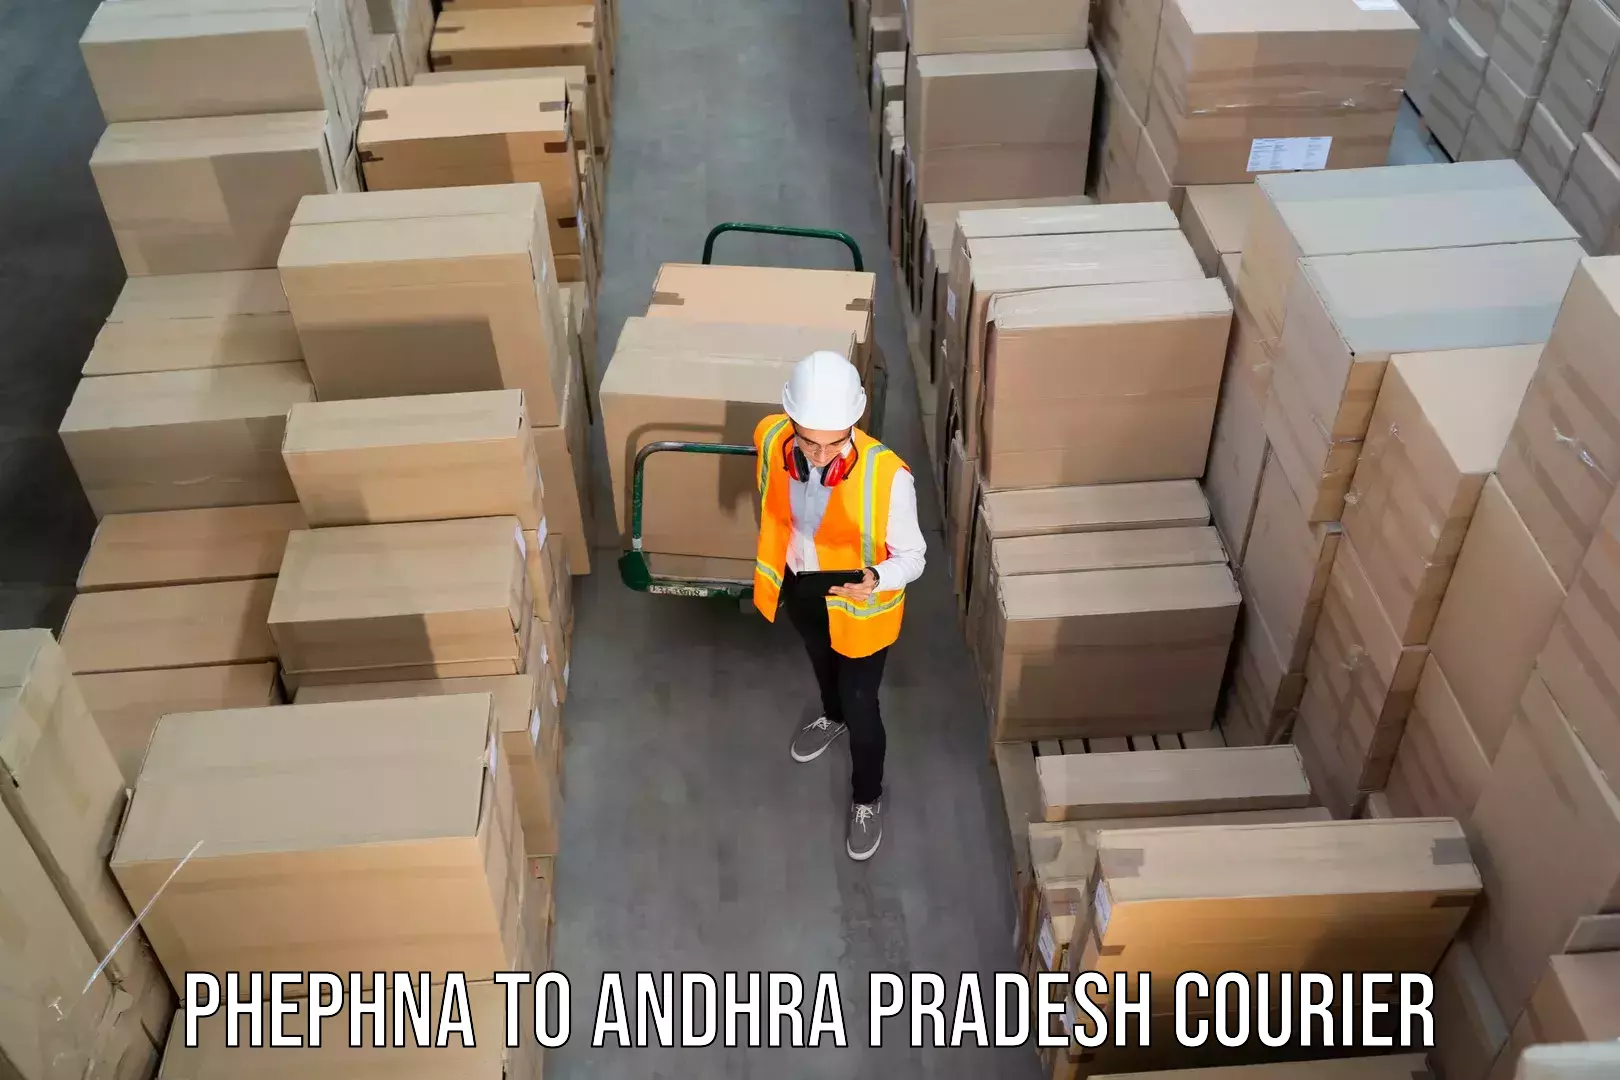 Express package services Phephna to Bhattiprolu